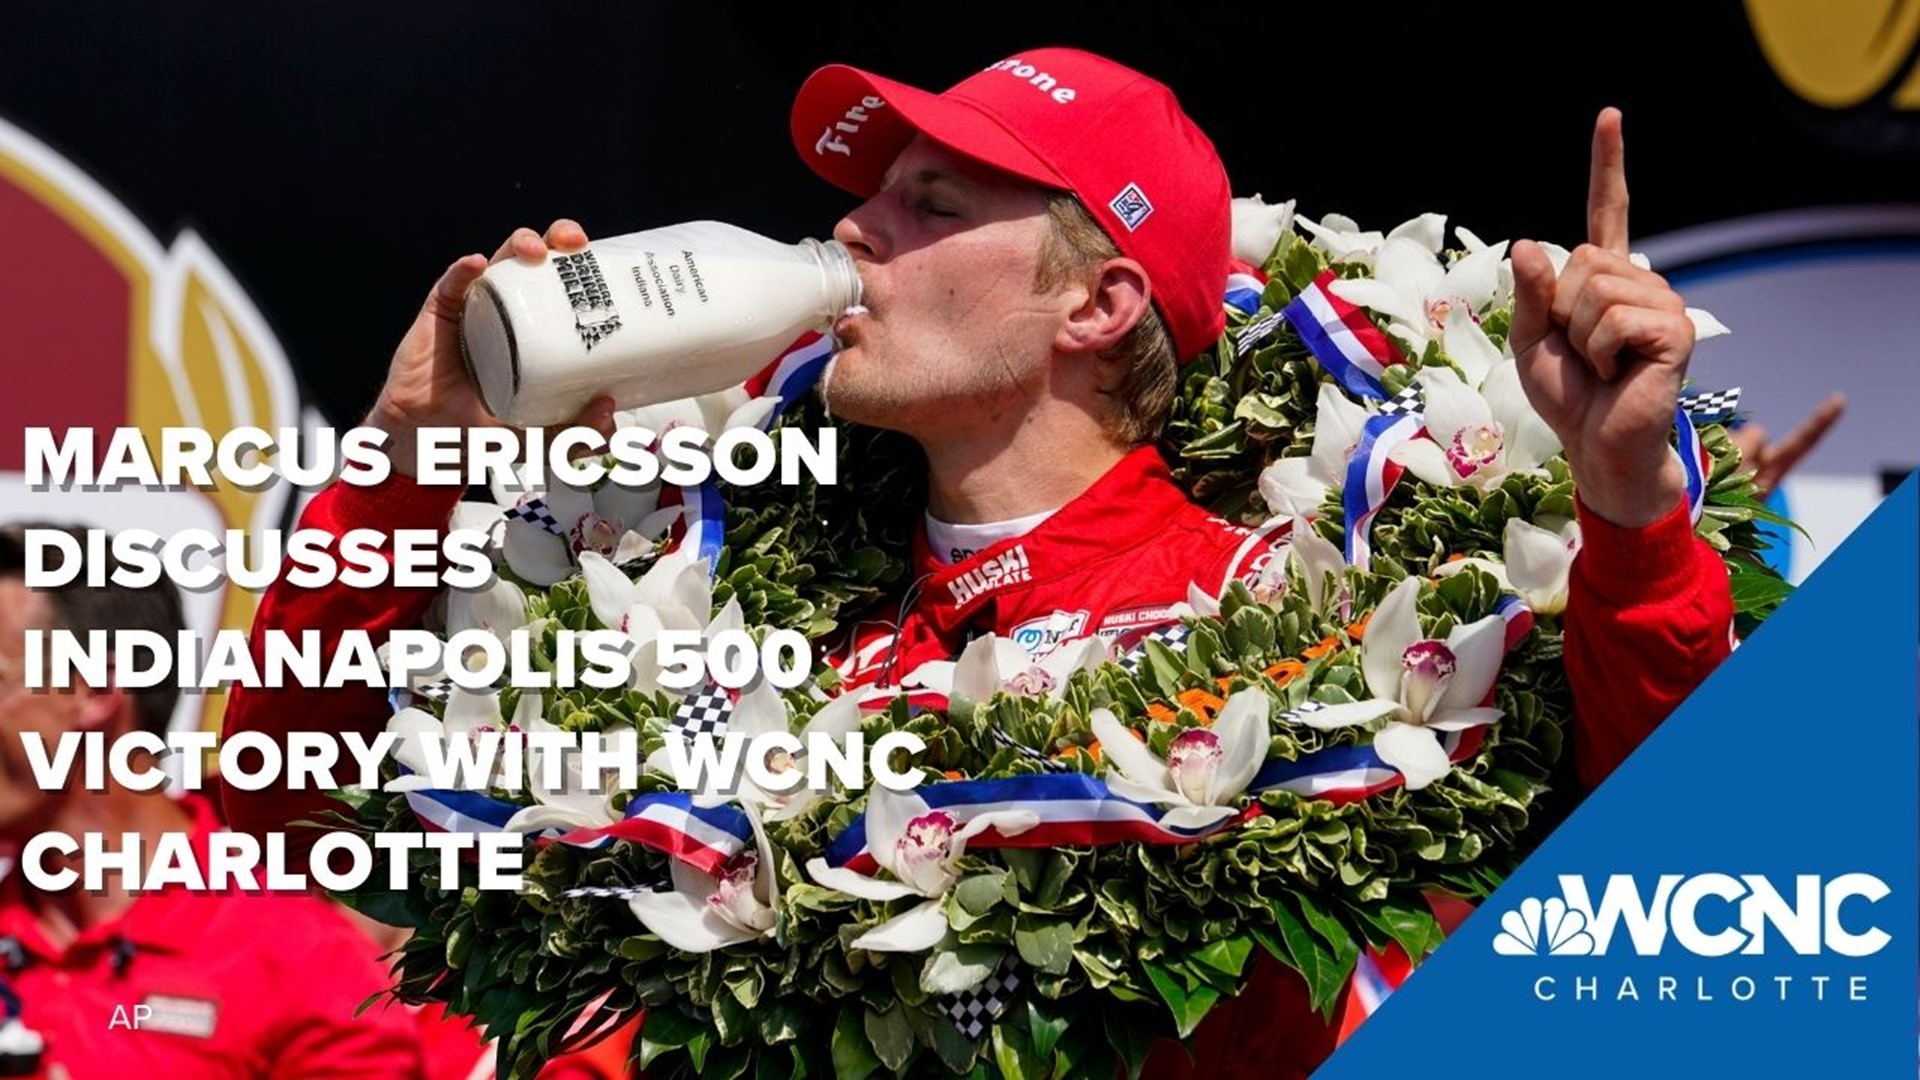 Ericsson discusses his Indianapolis 500 win, switch to IndyCar from Formula 1, and teammate Jimmie Johnson